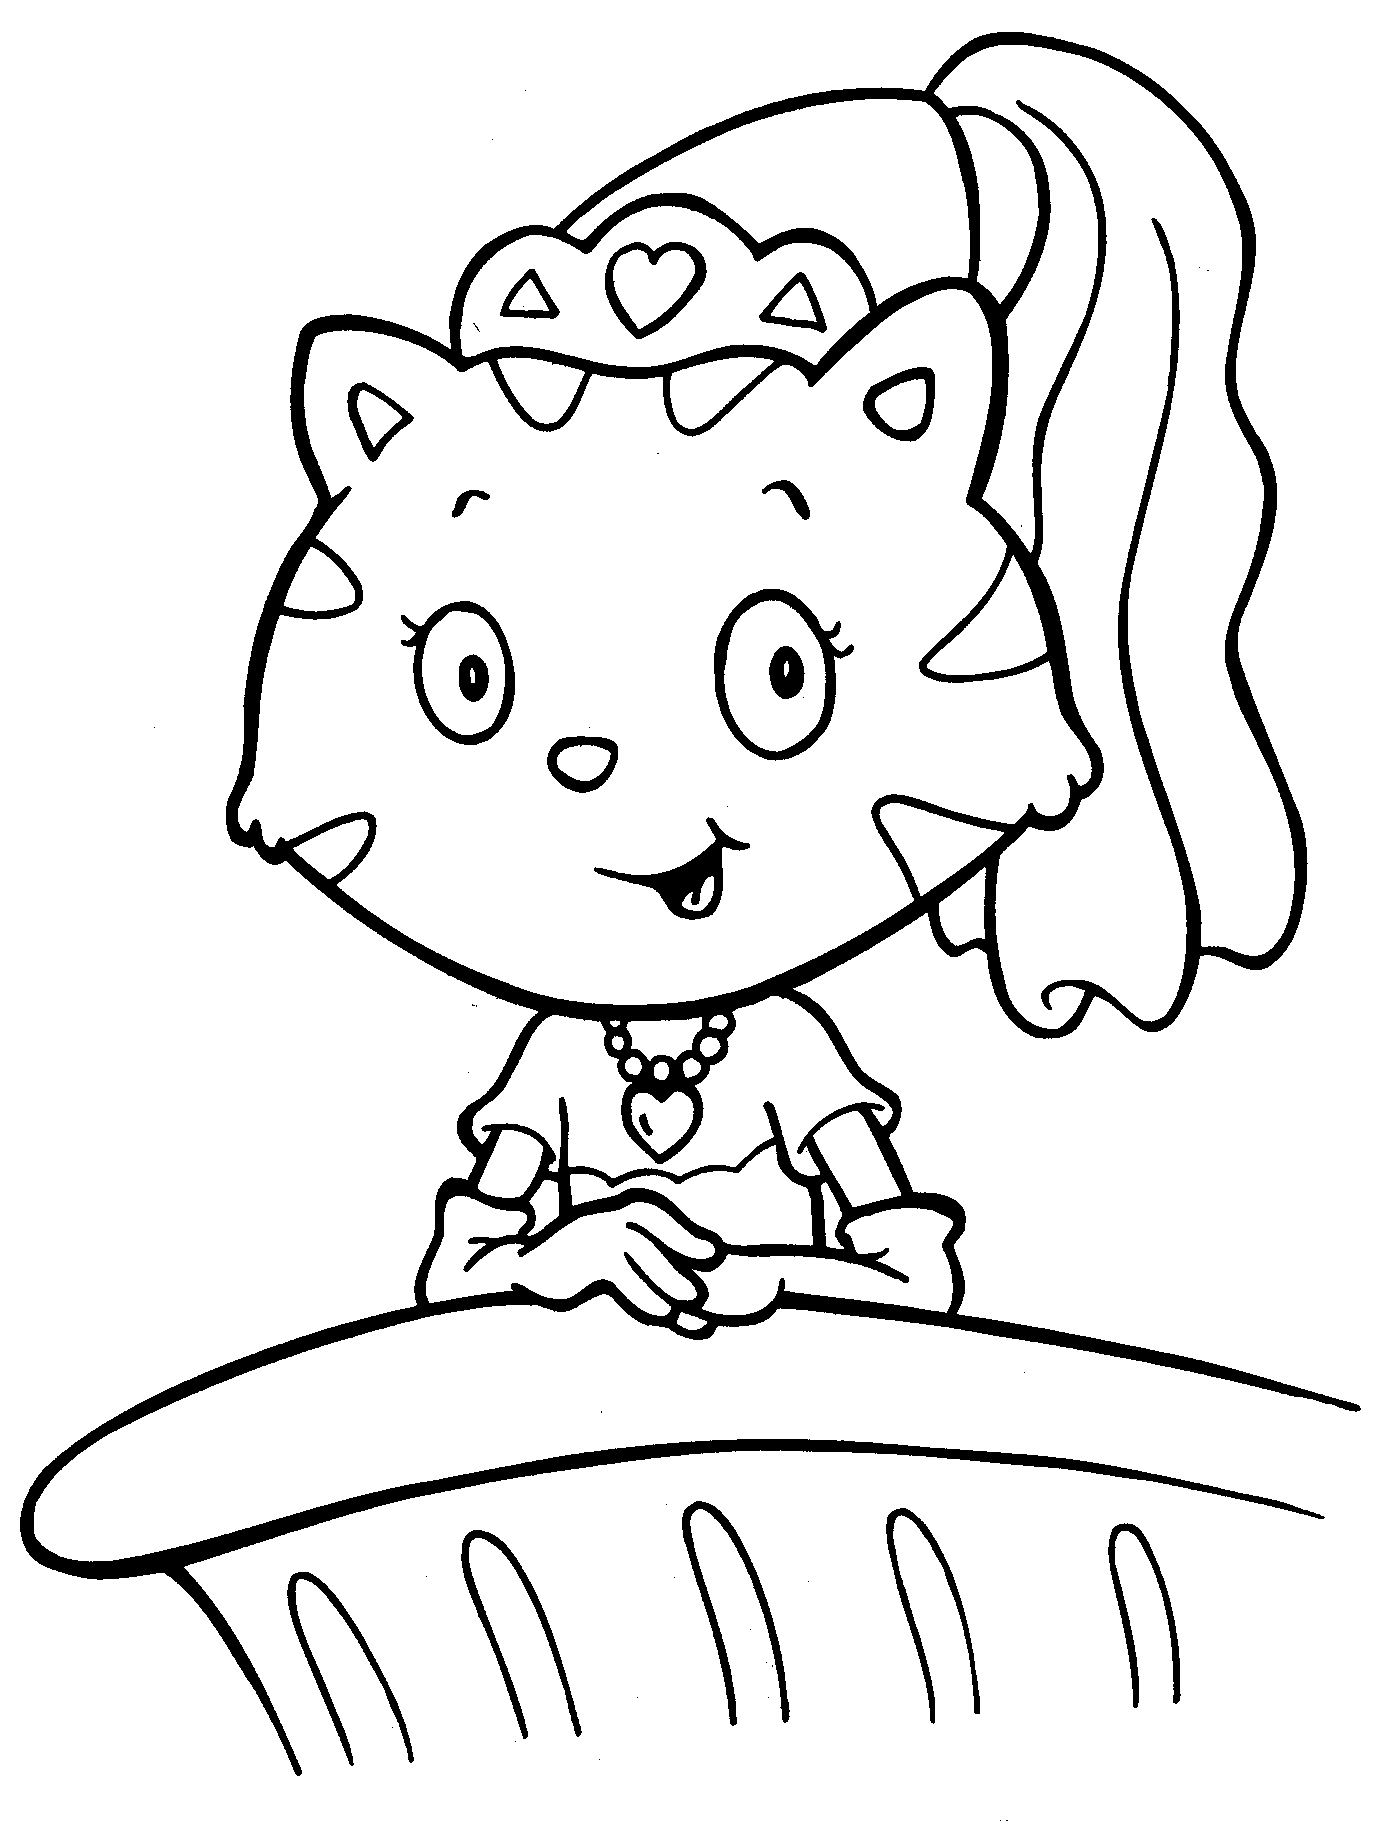 kitty cat coloring pages